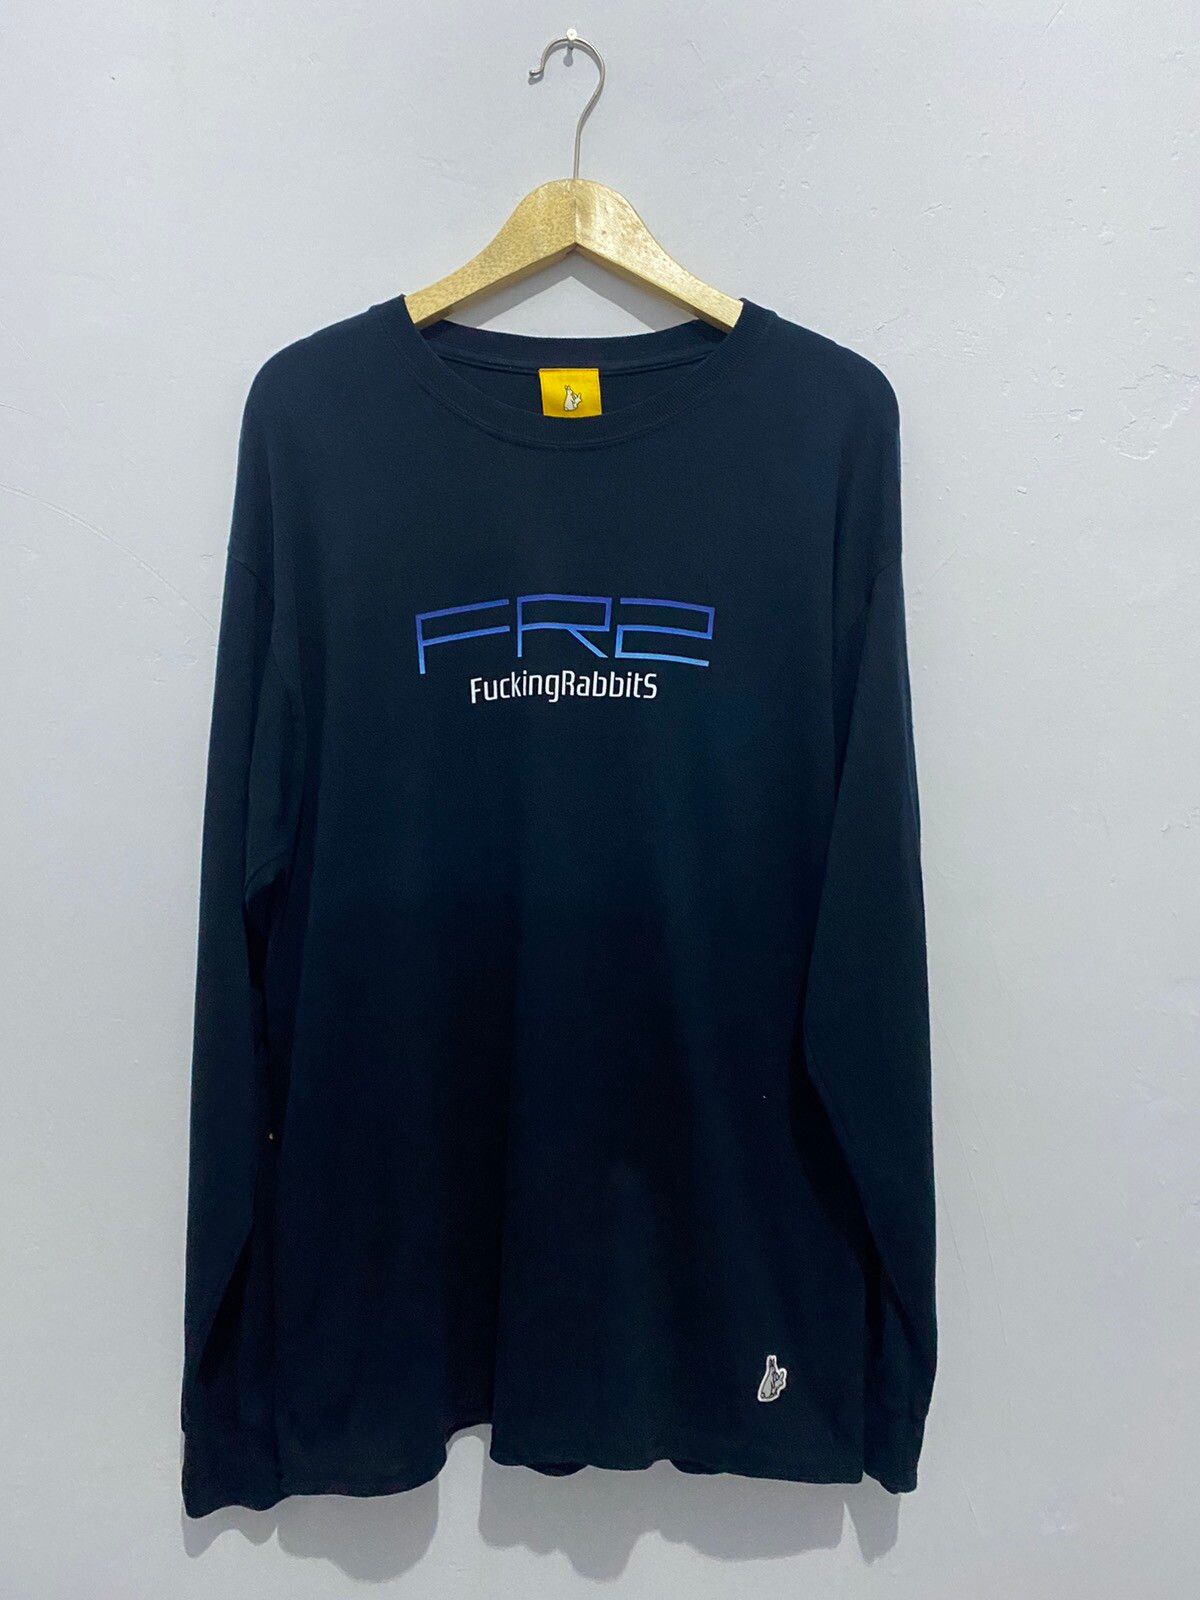 Japanese Brand Fucking Rabbits Playstation Rip Off Size US L / EU 52-54 / 3 - 2 Preview